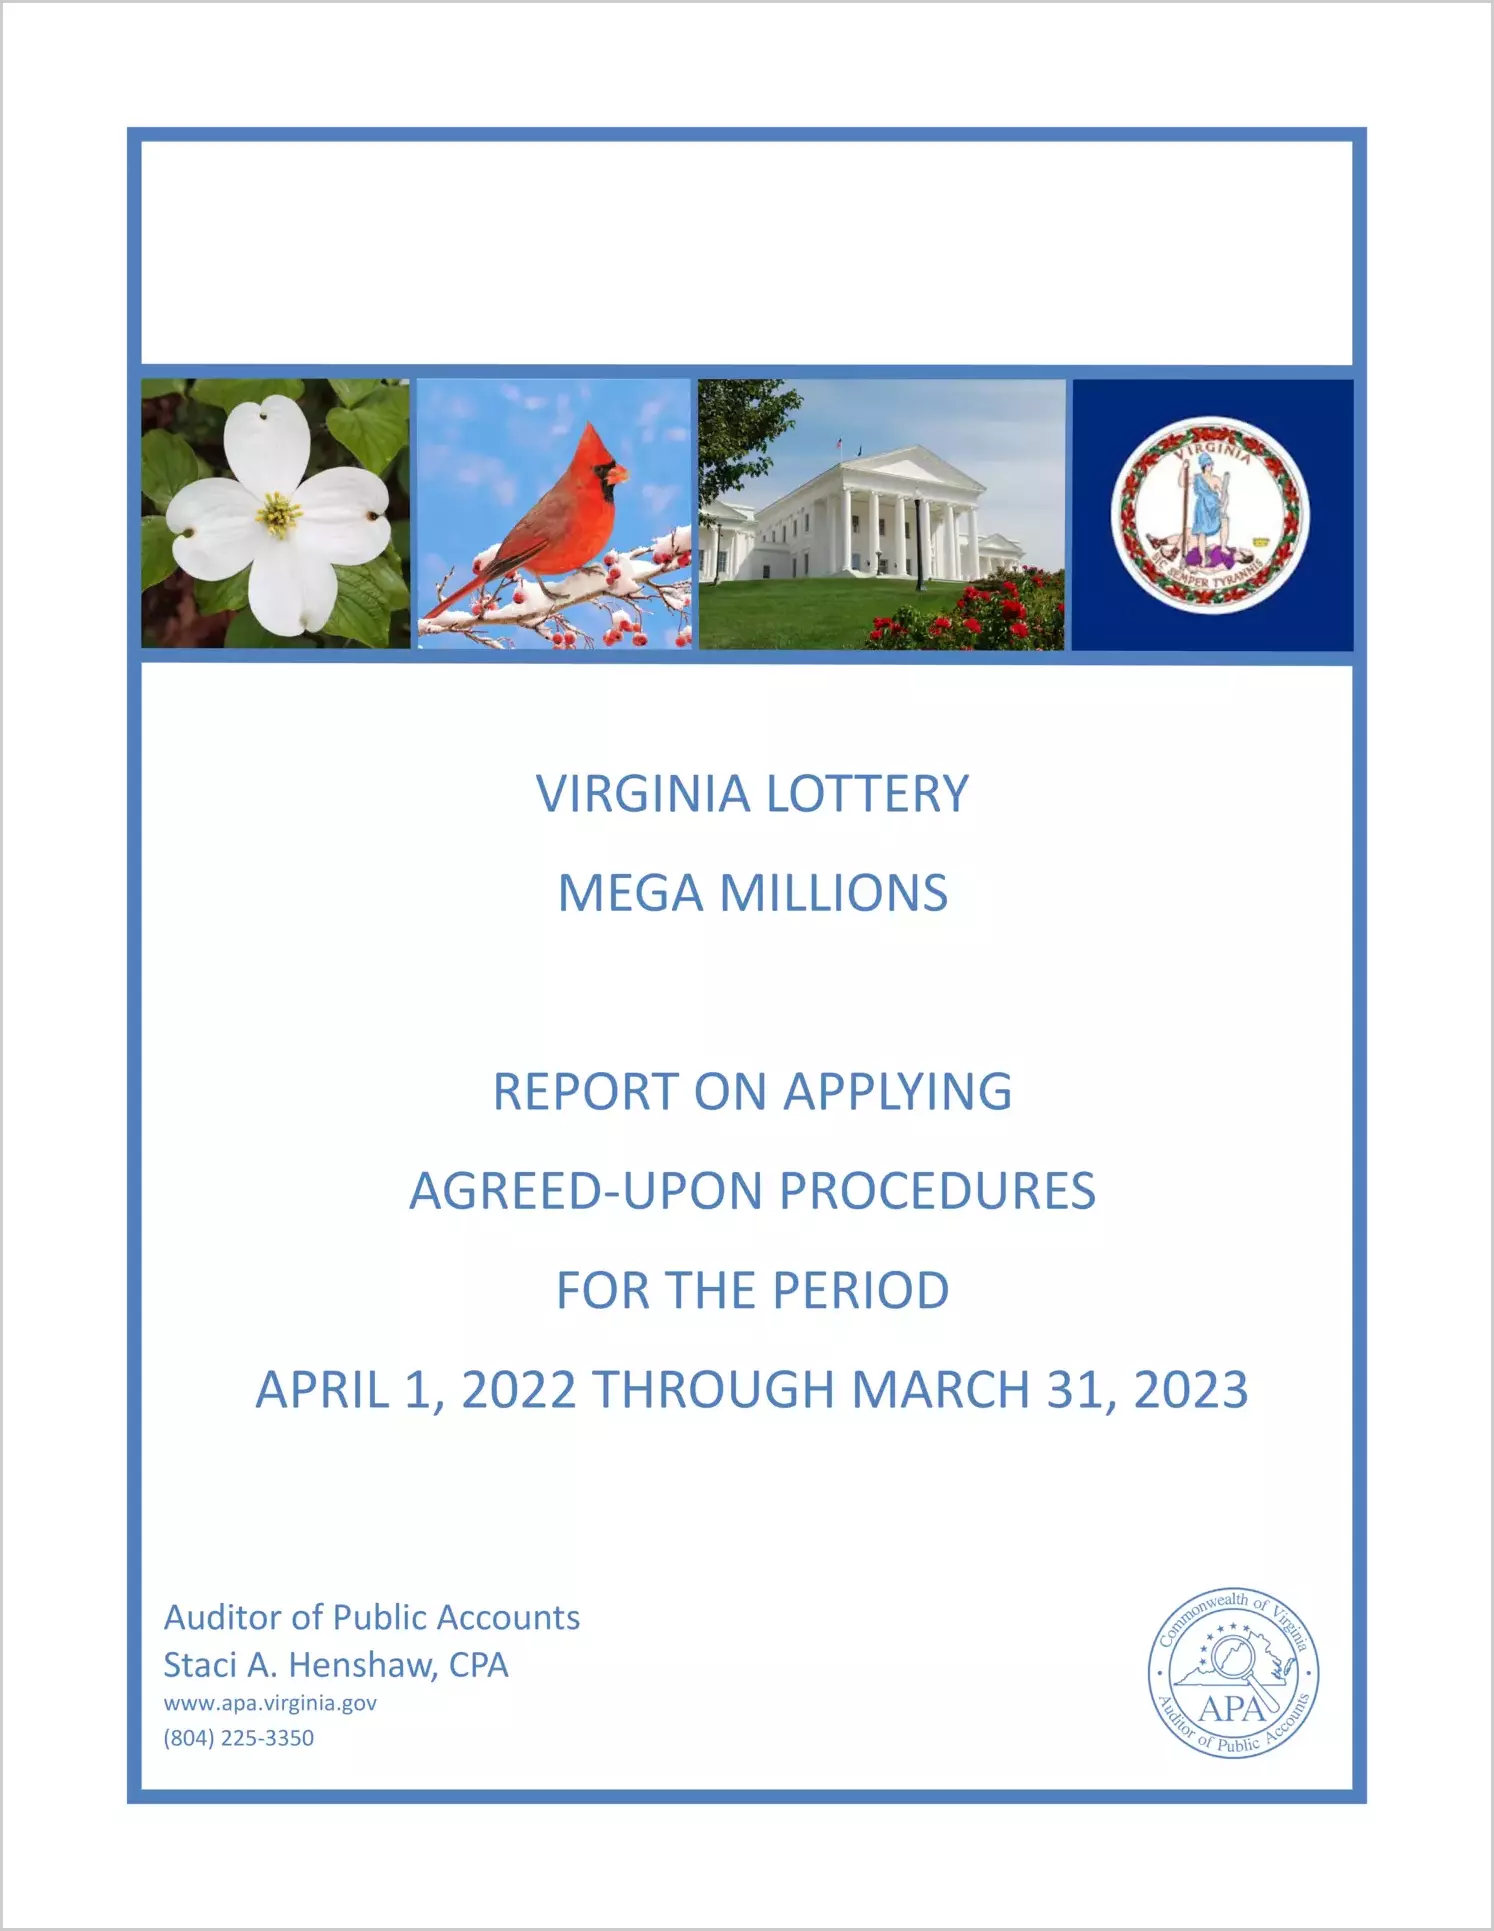 Virginia Lottery Mega Millions Report on Applying Agreed-Upon Procedures for the period April 1, 2022 through March 31, 2023